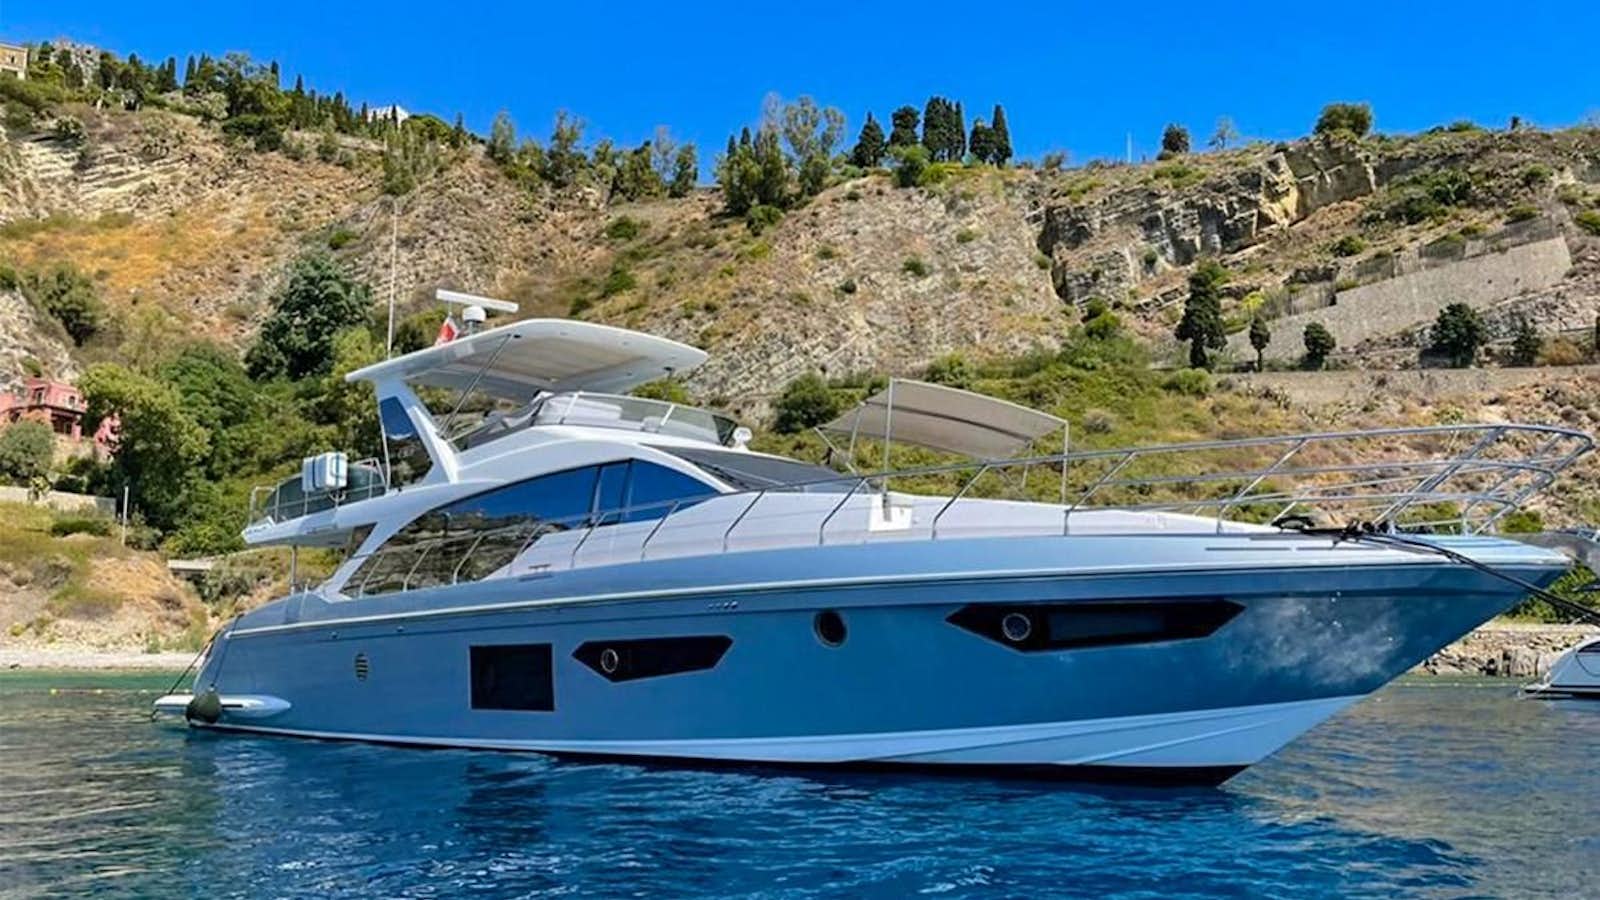 a boat in the water aboard OOSA Yacht for Sale